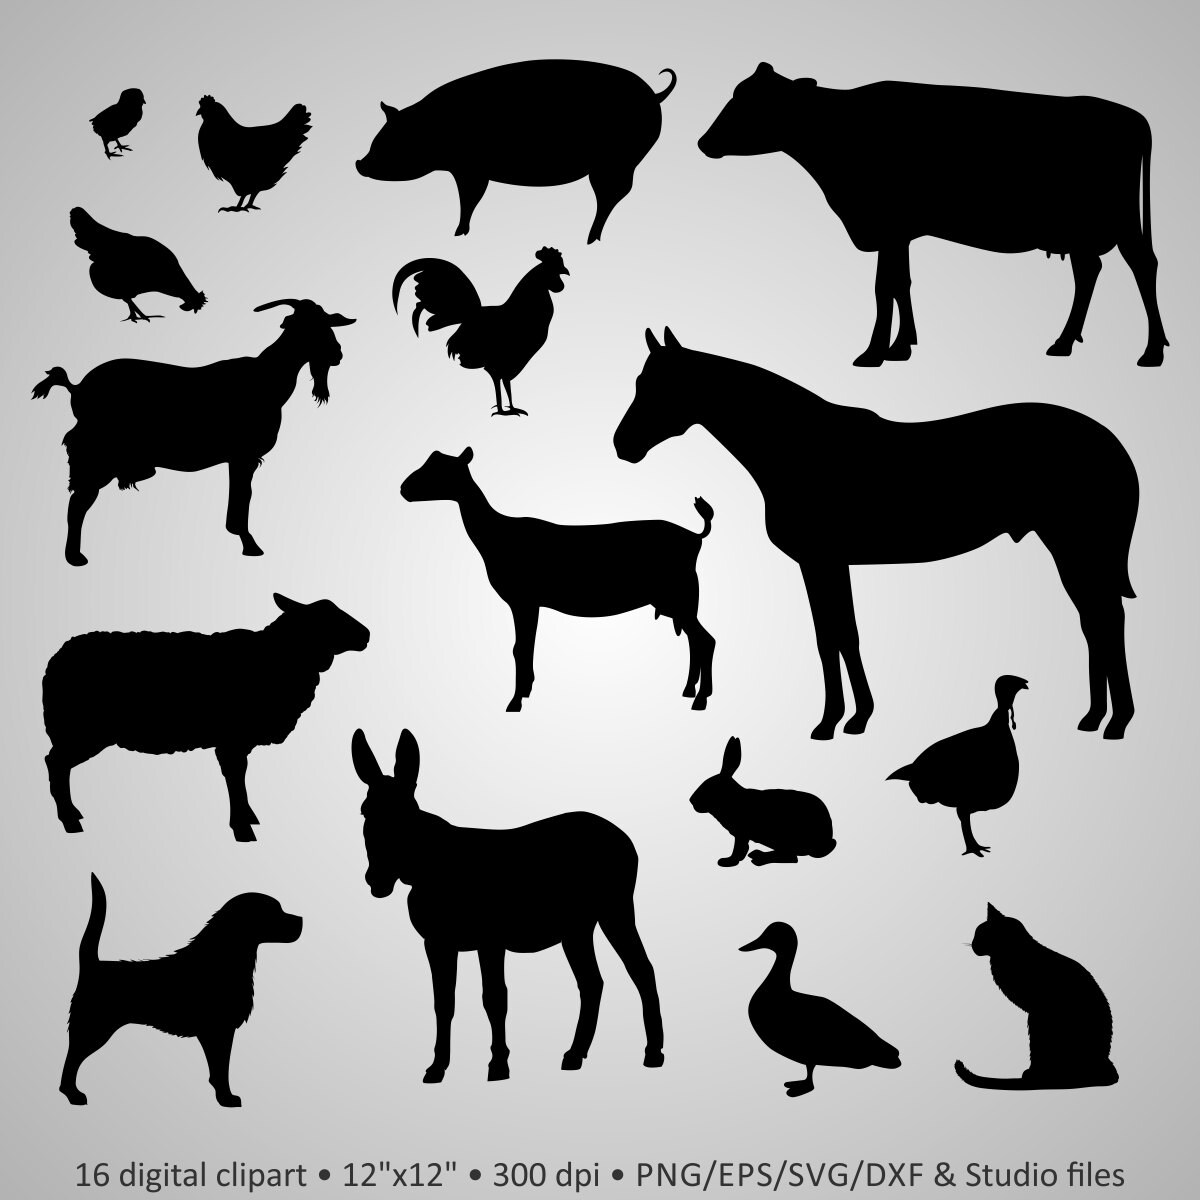 Download Buy 2 Get 1 Free Digital Clipart Farm Animals Silhouettes dog